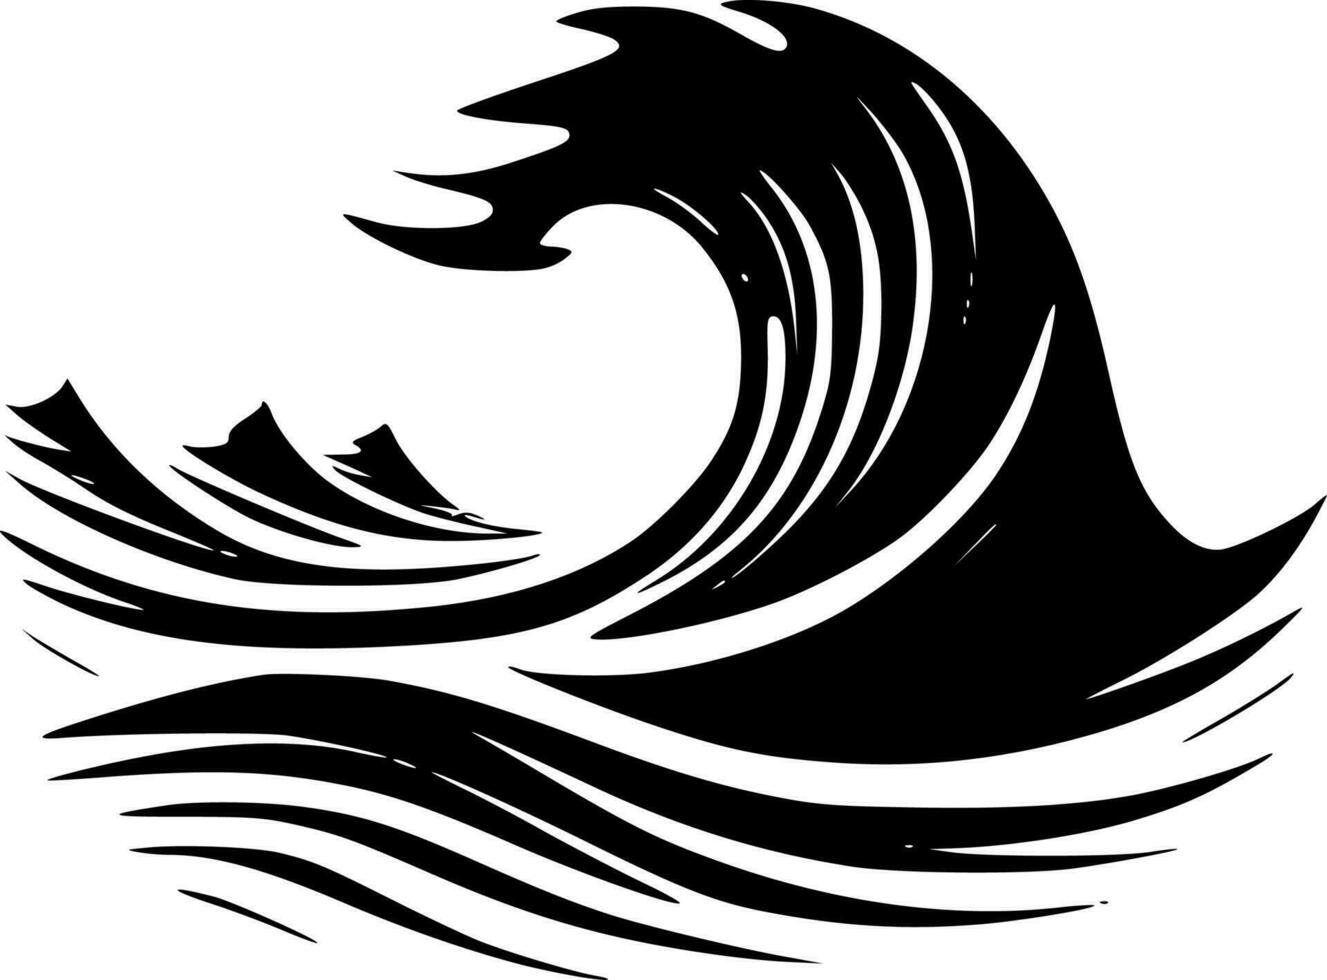 Wave - High Quality Vector Logo - Vector illustration ideal for T-shirt graphic